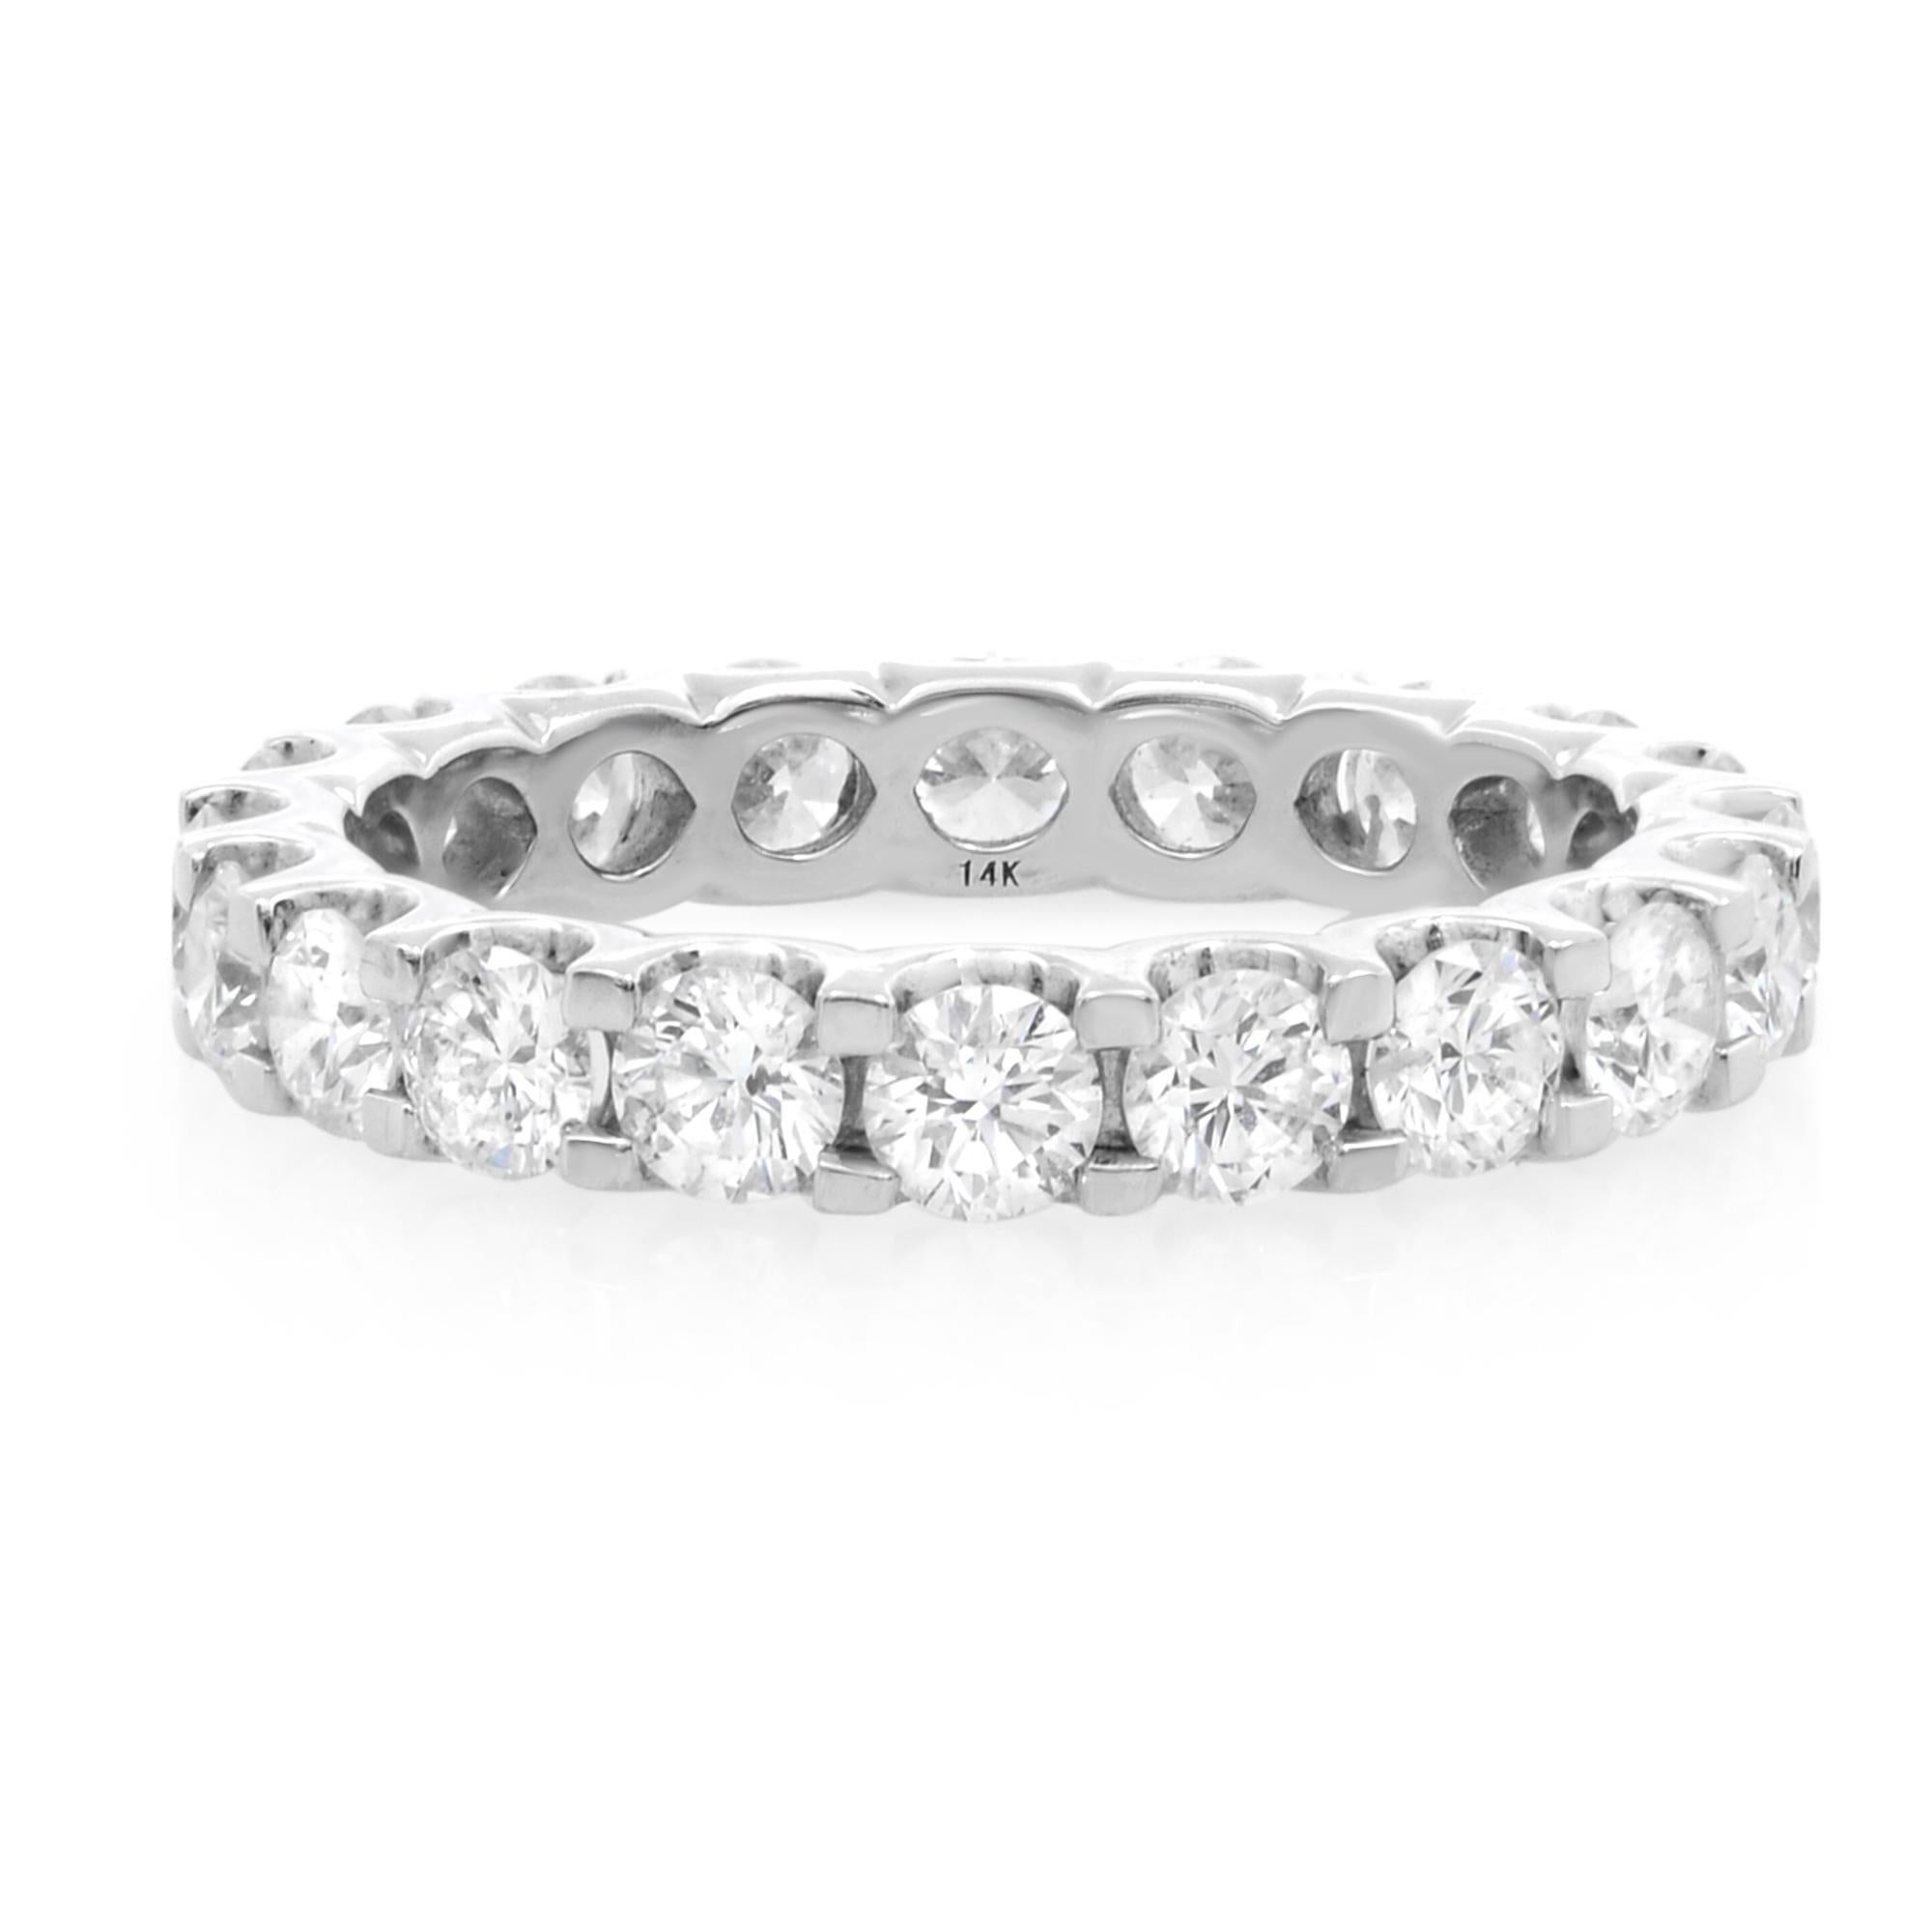 Round Cut Diamond Eternity Wedding Band Ladies Ring 14K White Gold 2.00Cttw Size 6.5 For Sale